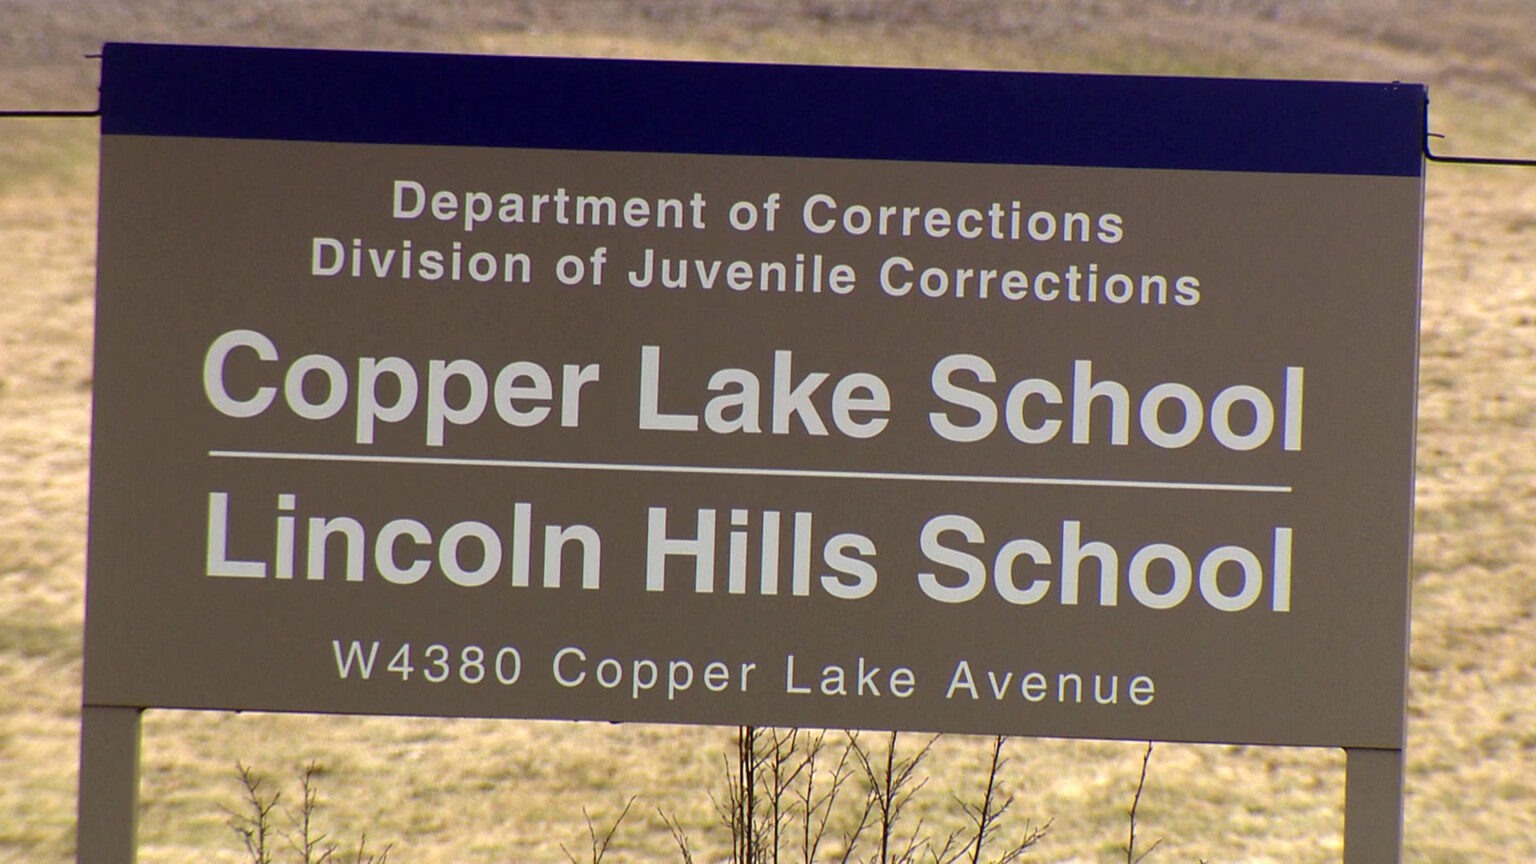 An entrance sign with the words Department of Corrections, Division of Juvenile Corrections, Copper Lake School, Lincoln Hills School and the address W 4380 Copper Lake Avenue stands in front of a field.